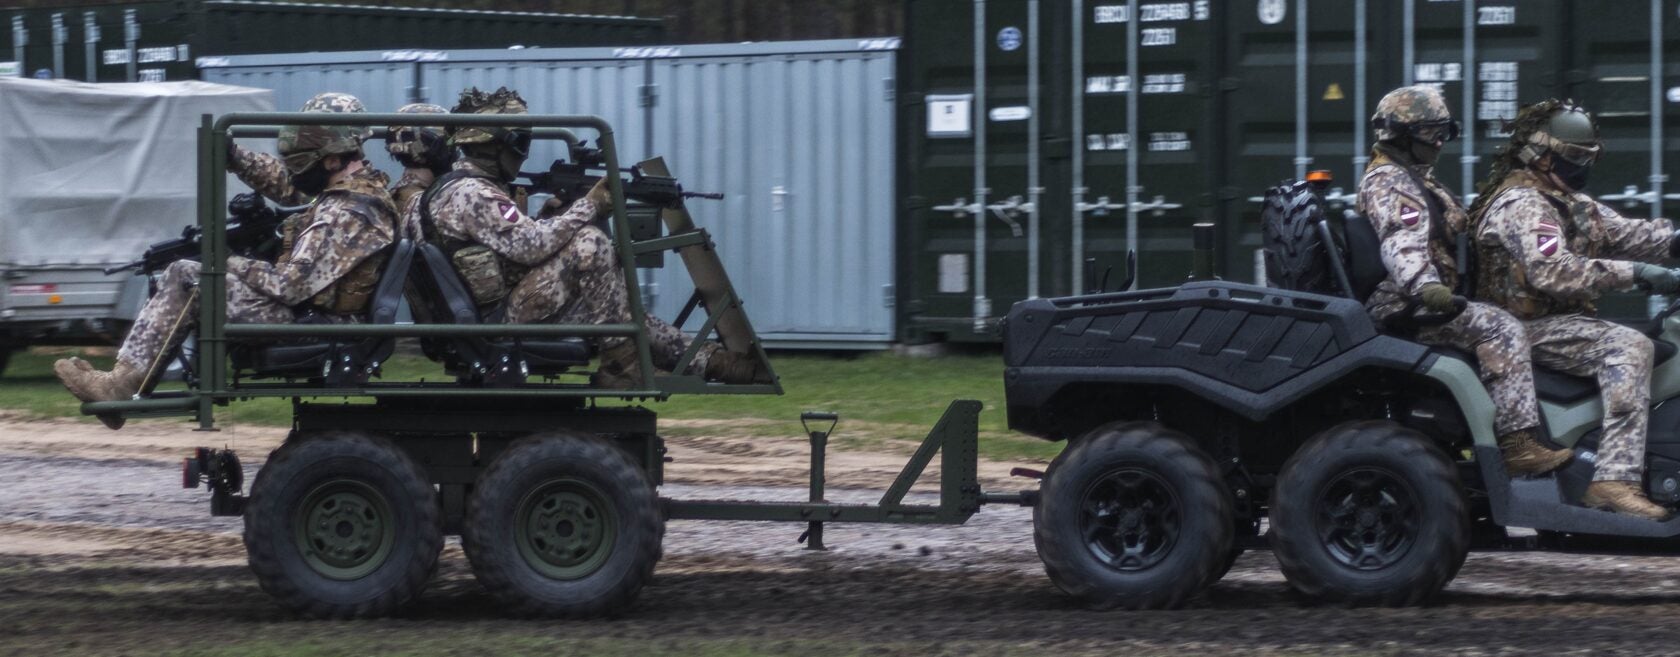 Why Latvia Donated Quads and Electric Scooters to the Ukraine War Effort